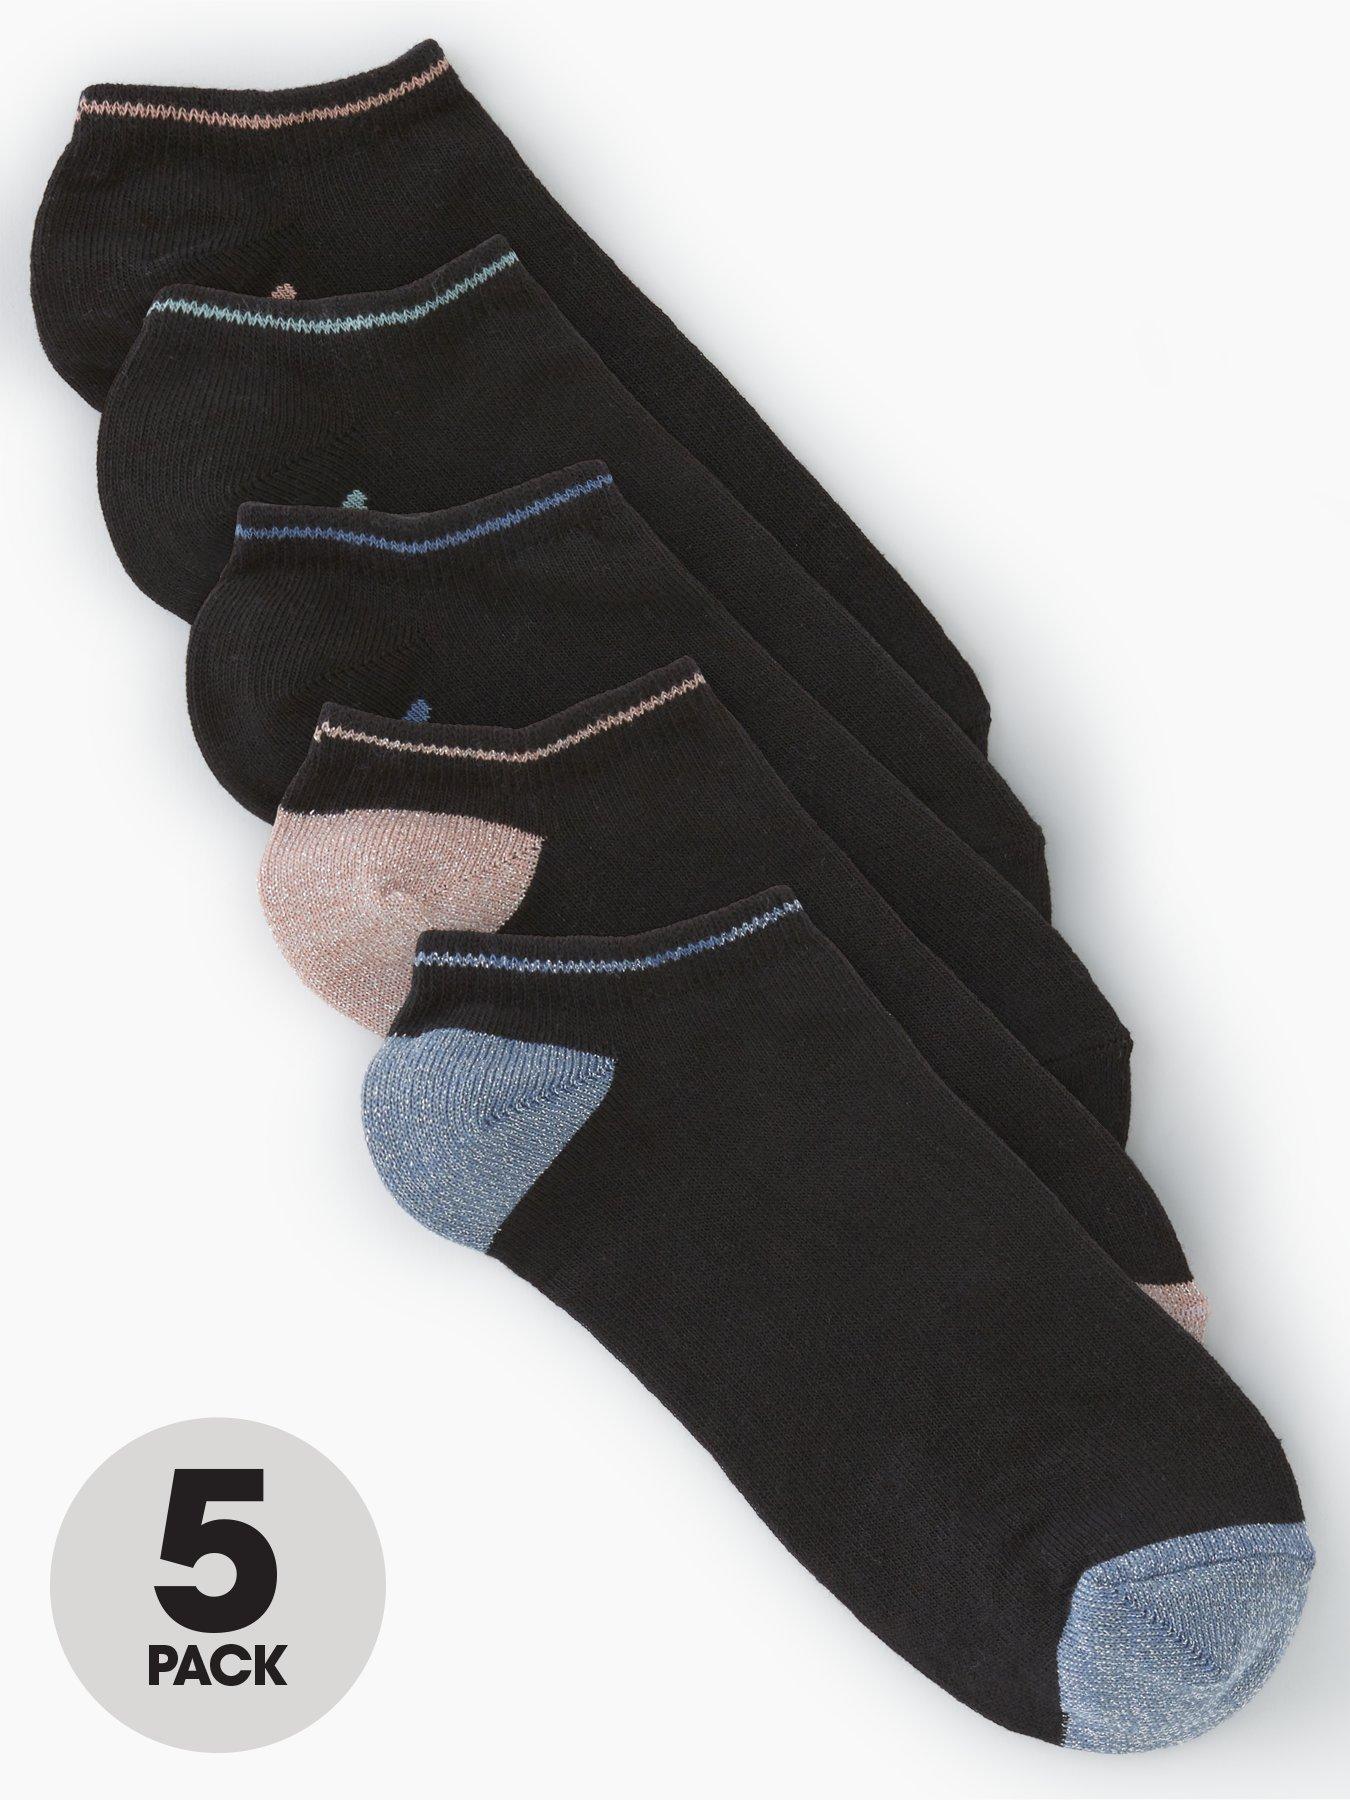 Fruit of the Loom Mens Big and Tall Invisible Liner 4 Pack Sock 